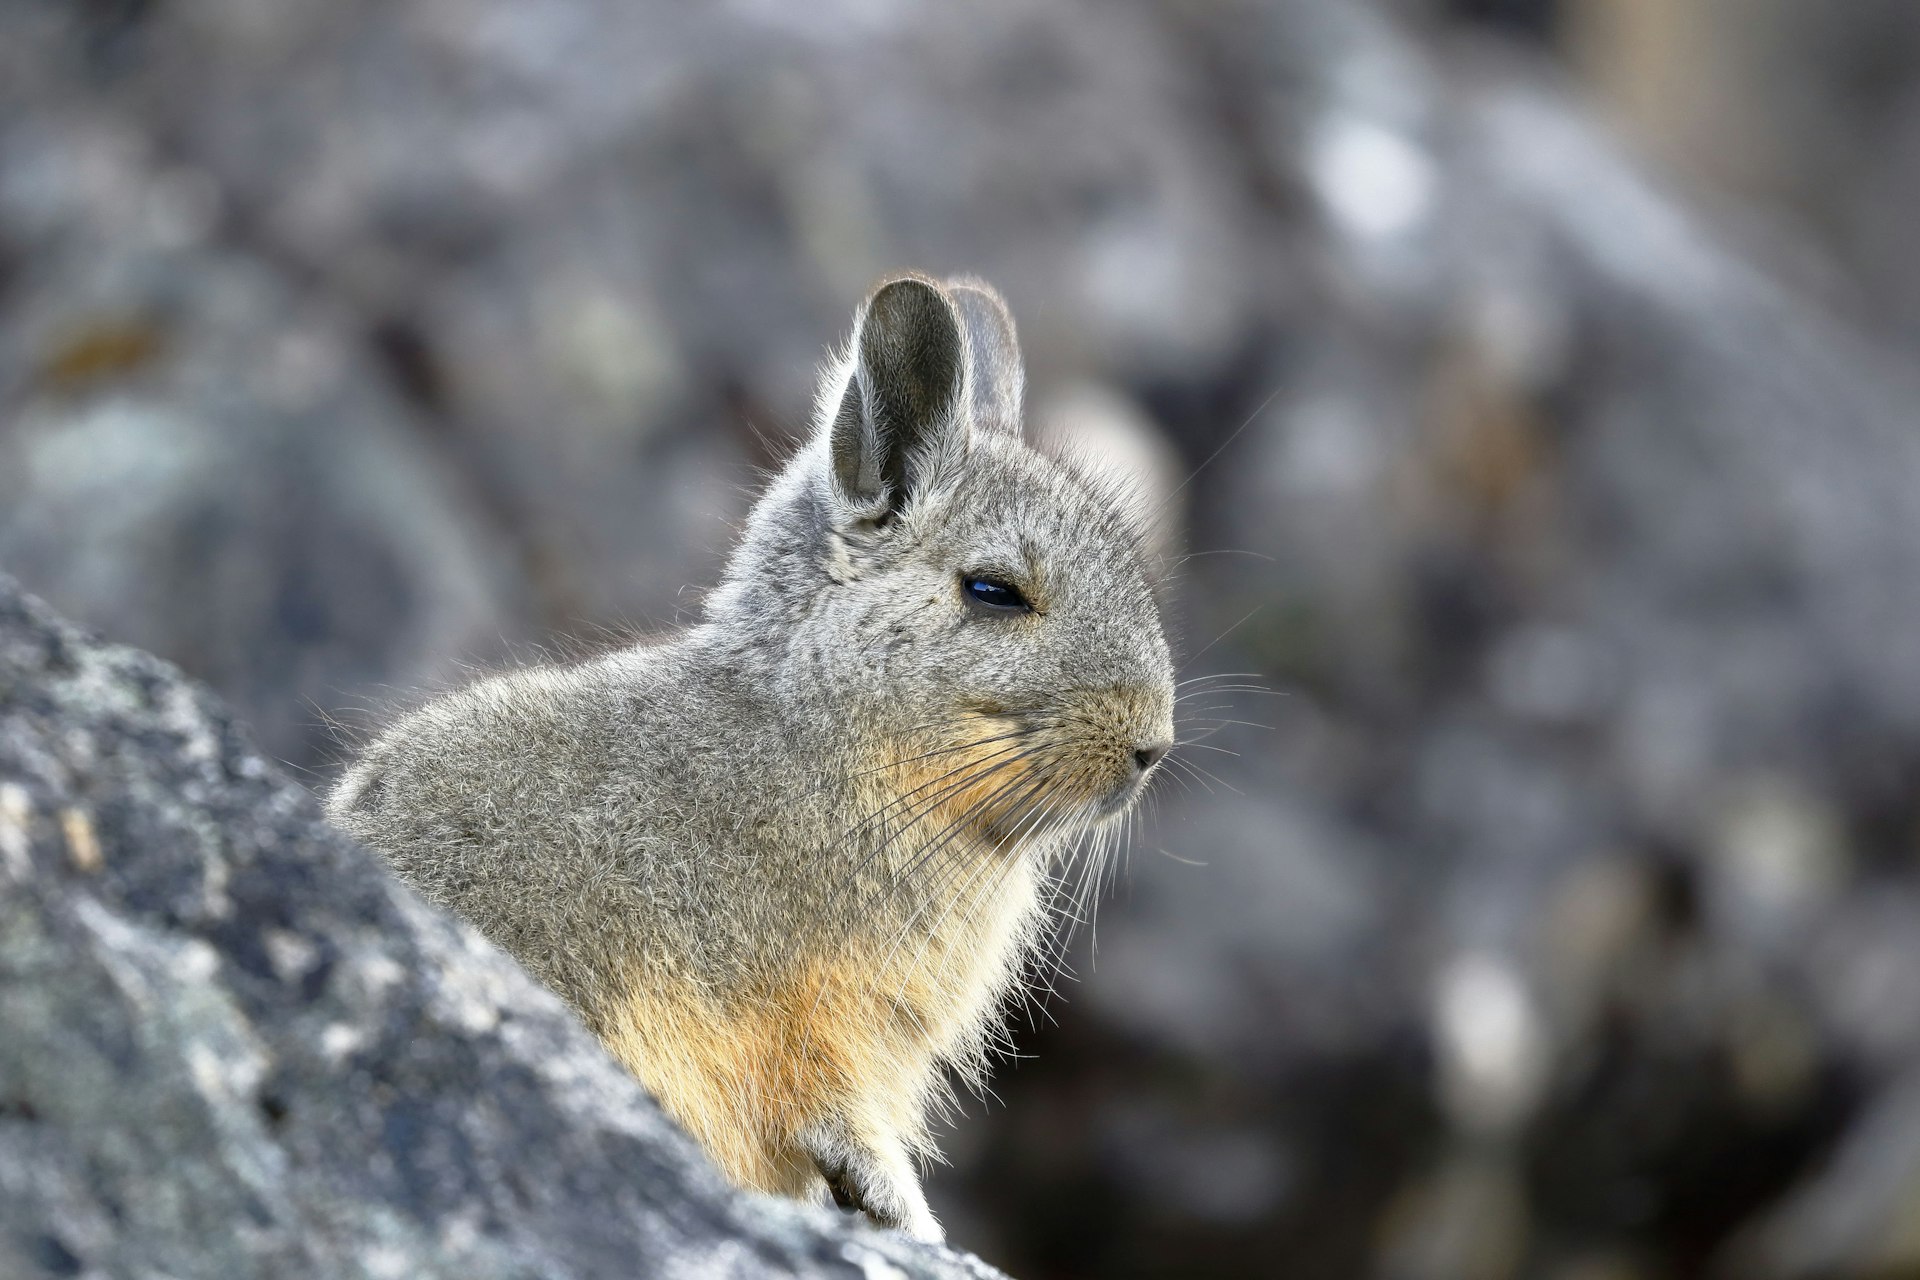 A viscacha peeking out from behind a rock